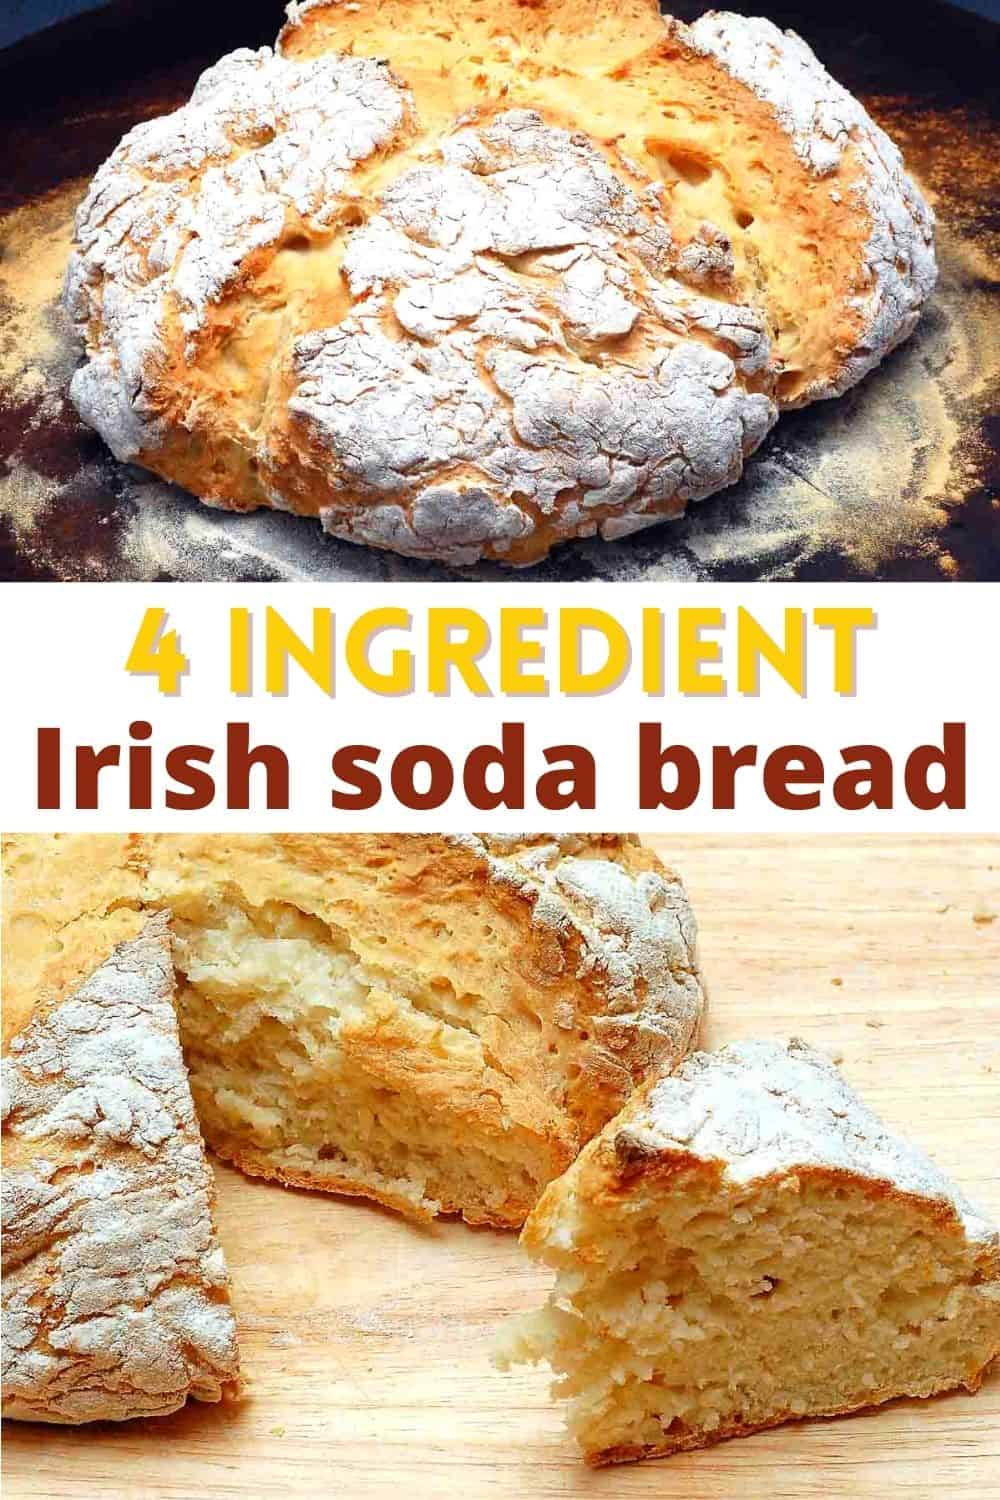 Irish soda bread is a no yeast bread that's hearty yet soft with an incredible crusty exterior. This easy quick bread is ready in 45 minutes!